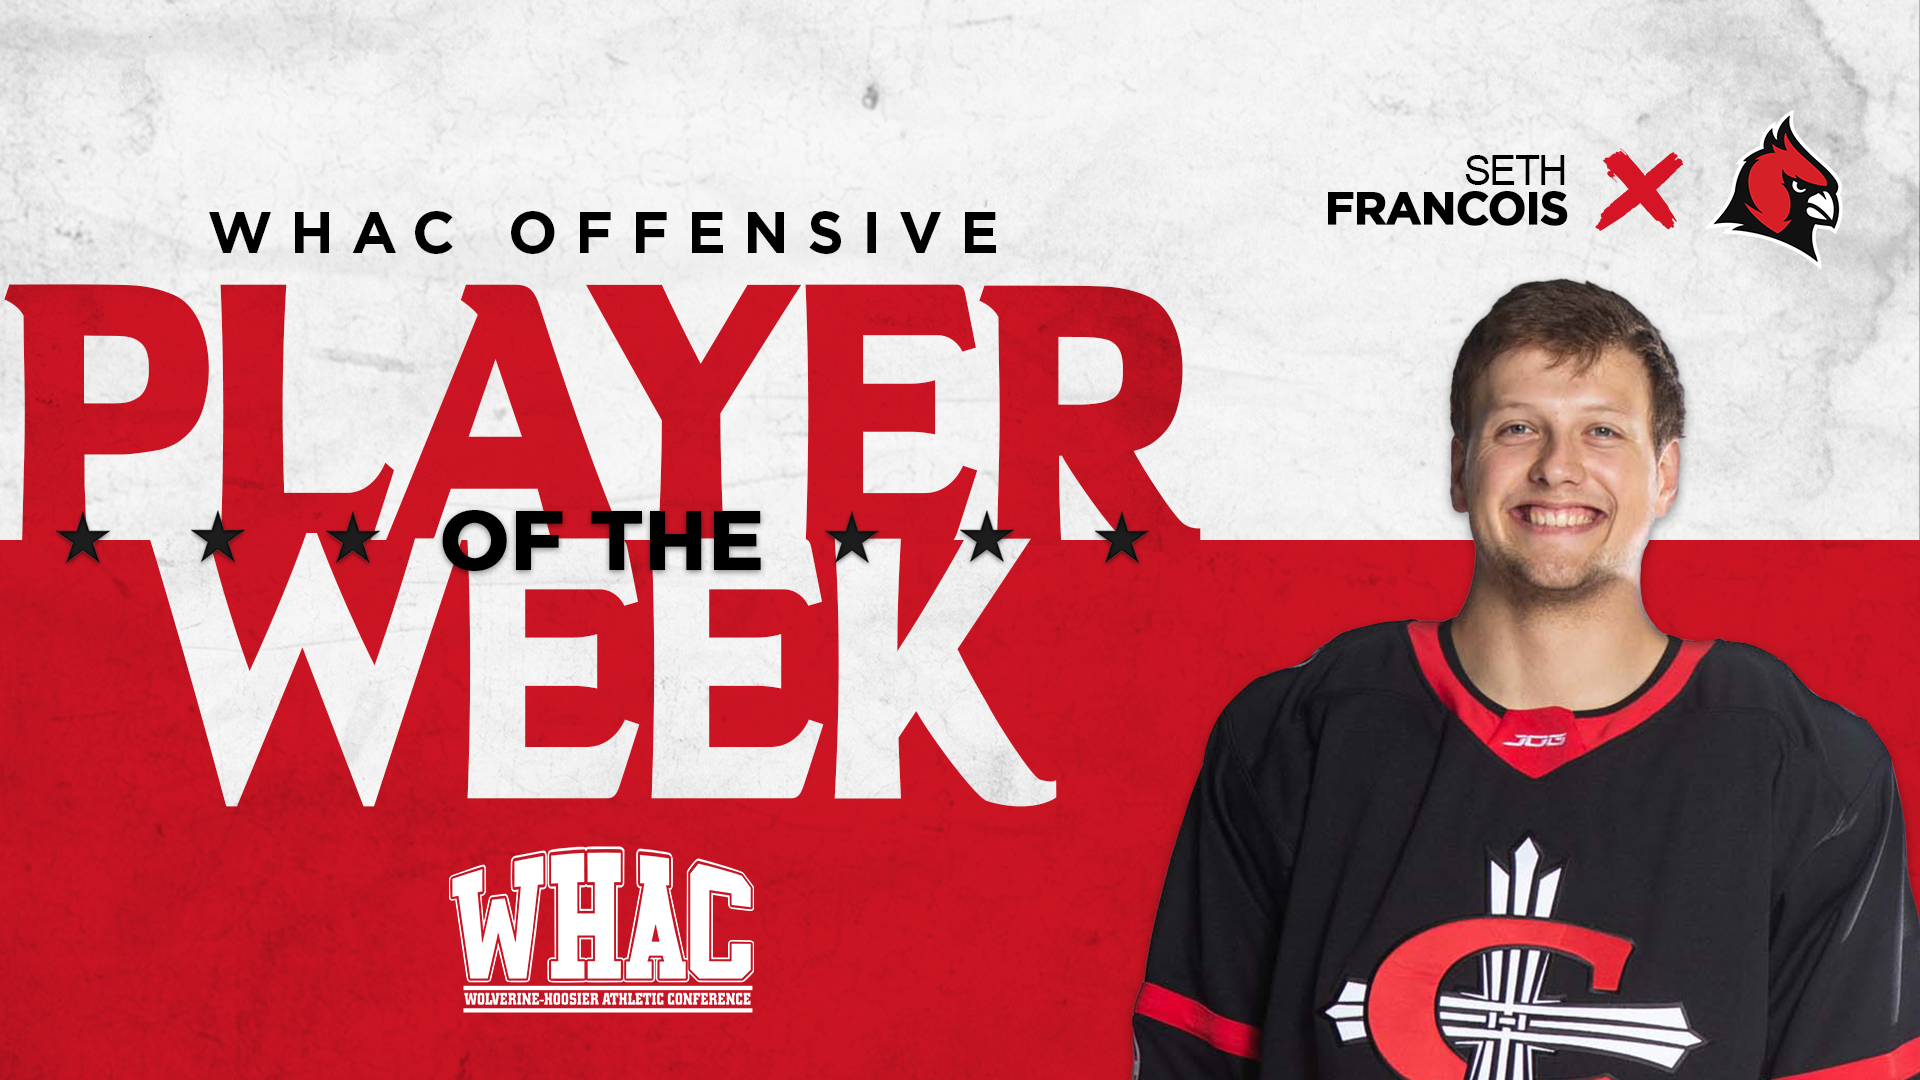 Seth Francois earns WHAC Offensive Player of the Week honors